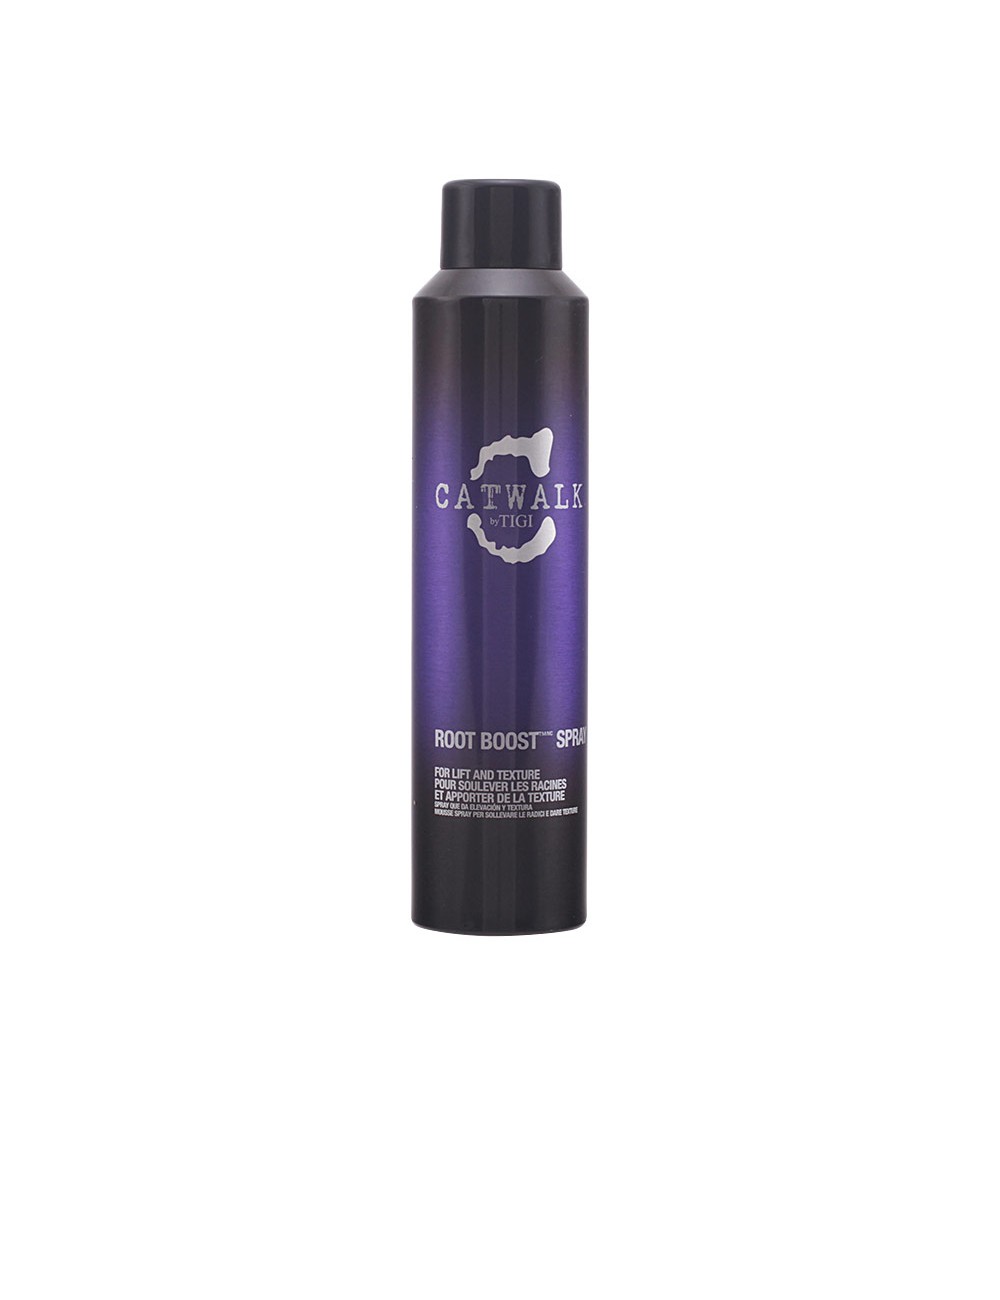 CATWALK your highness root boost spray 250ml